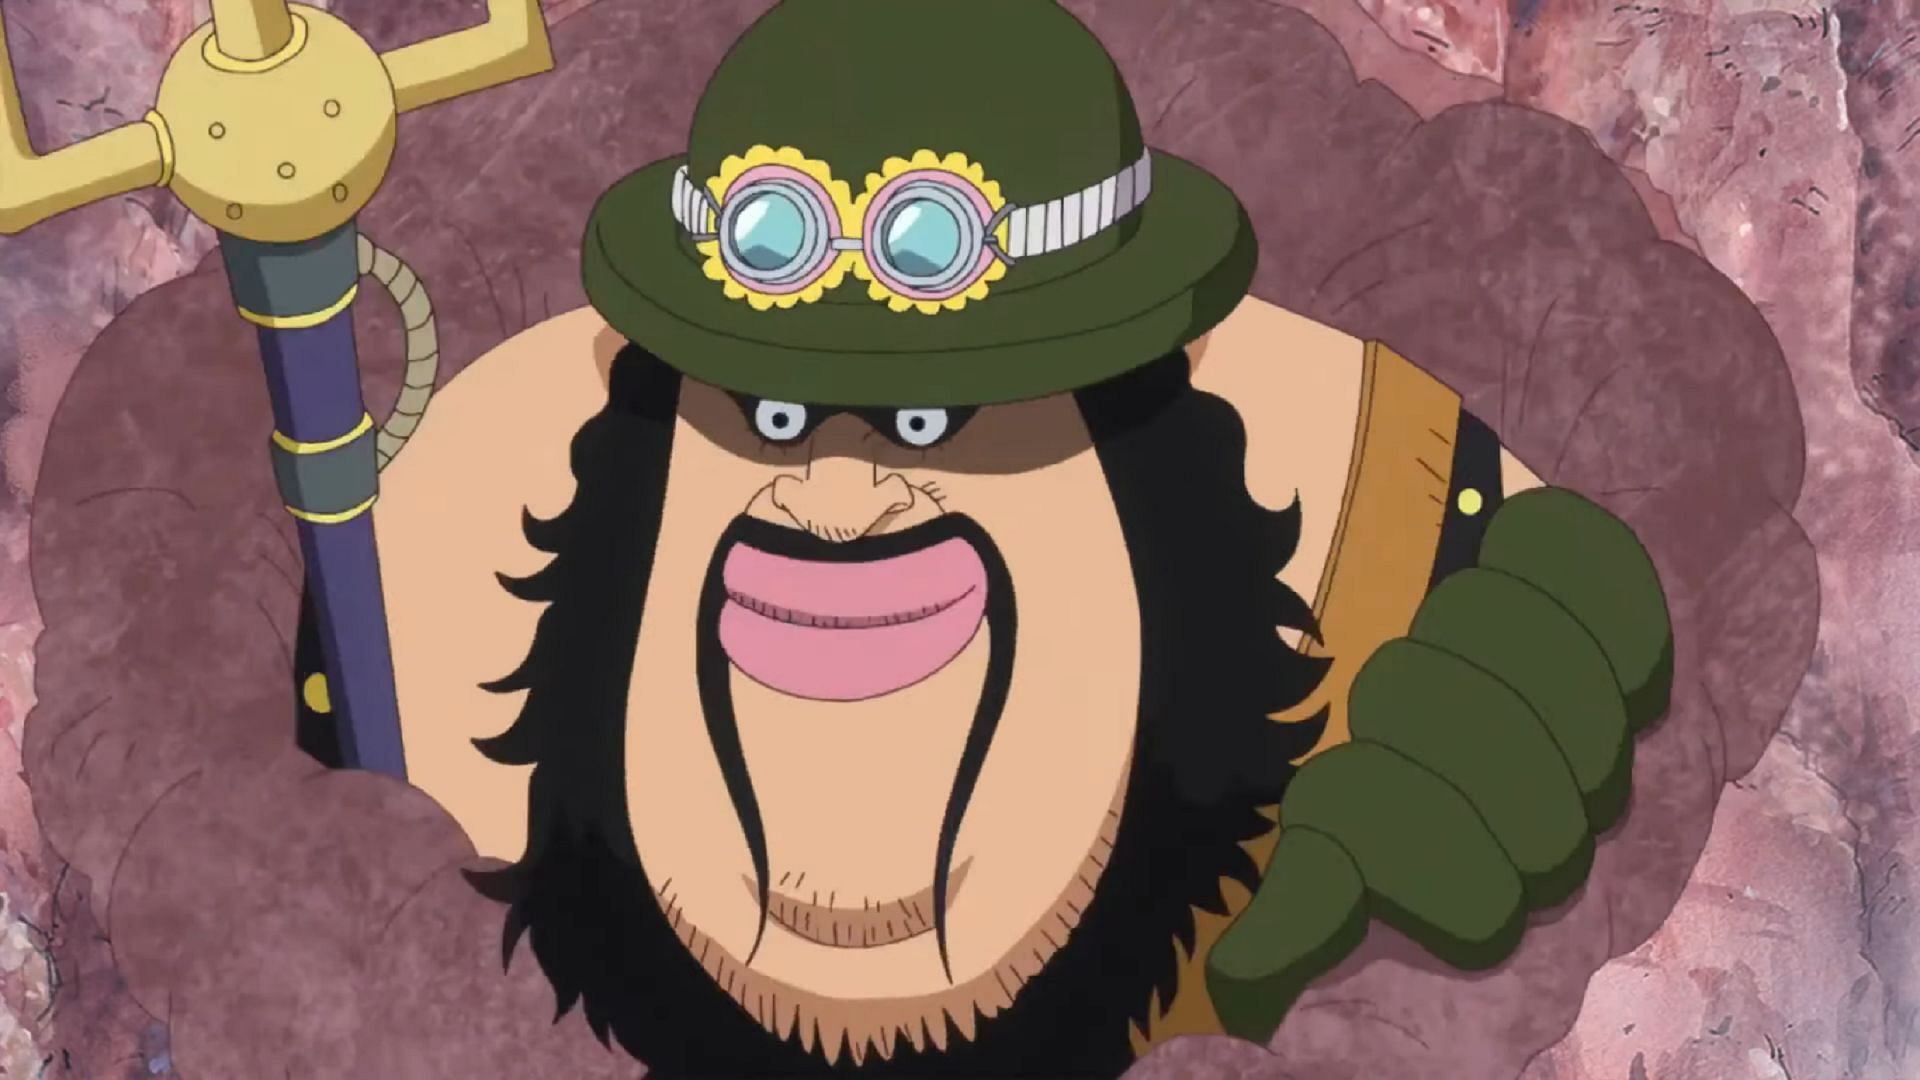 Morley as seen in One Piece (Image via Toei Animation, One Piece)